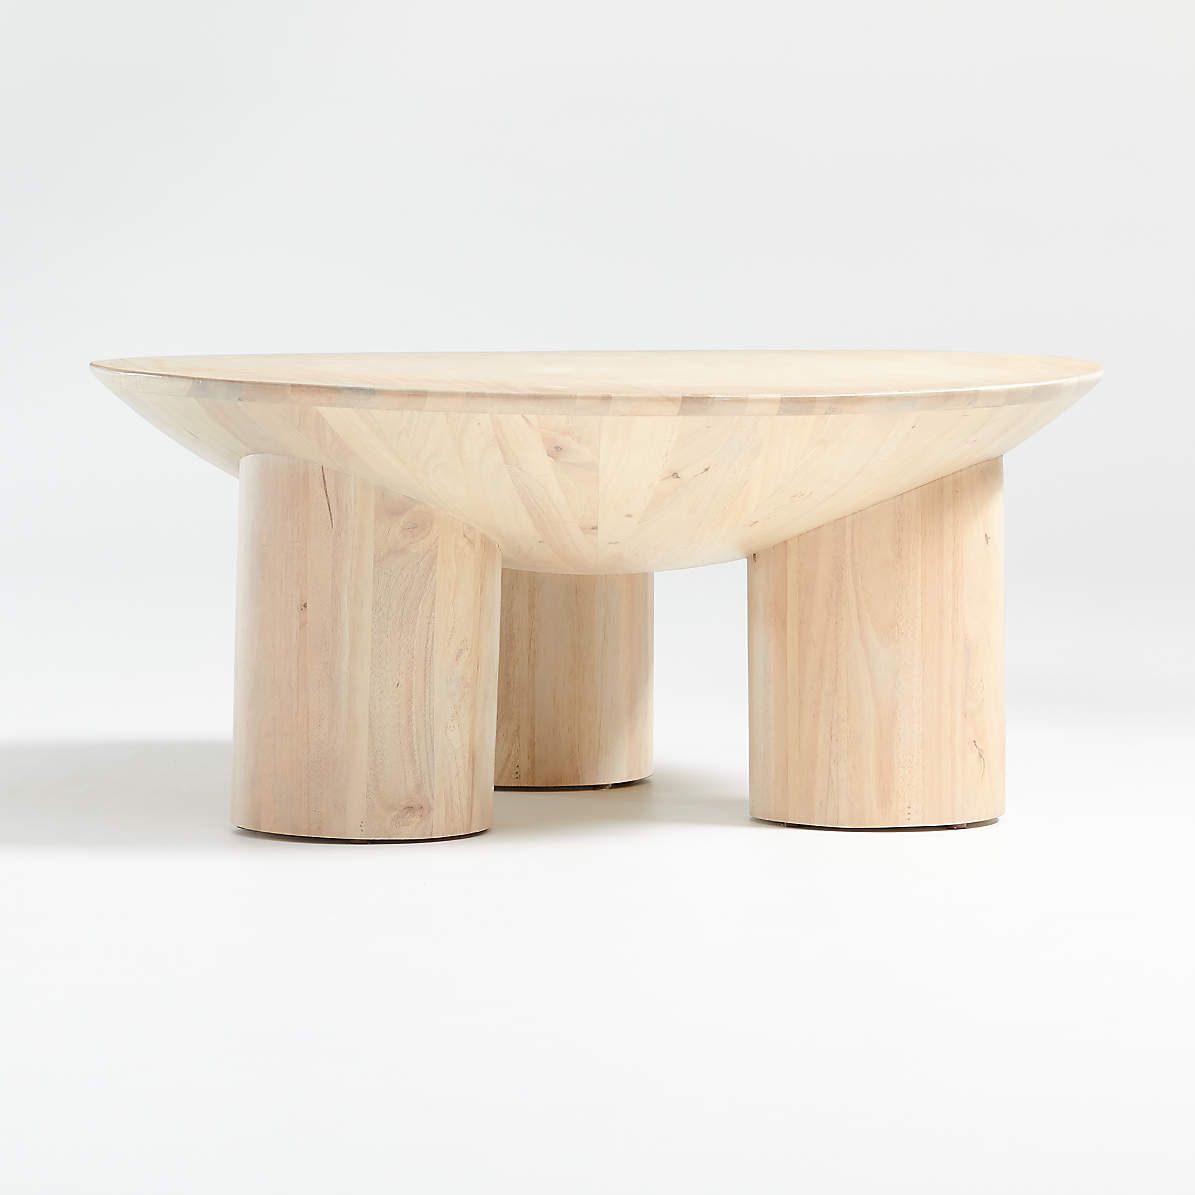 Tom Natural Three Legged Coffee Tableleanne Ford + Reviews | Crate &  Barrel Pertaining To 3 Leg Coffee Tables (View 4 of 15)